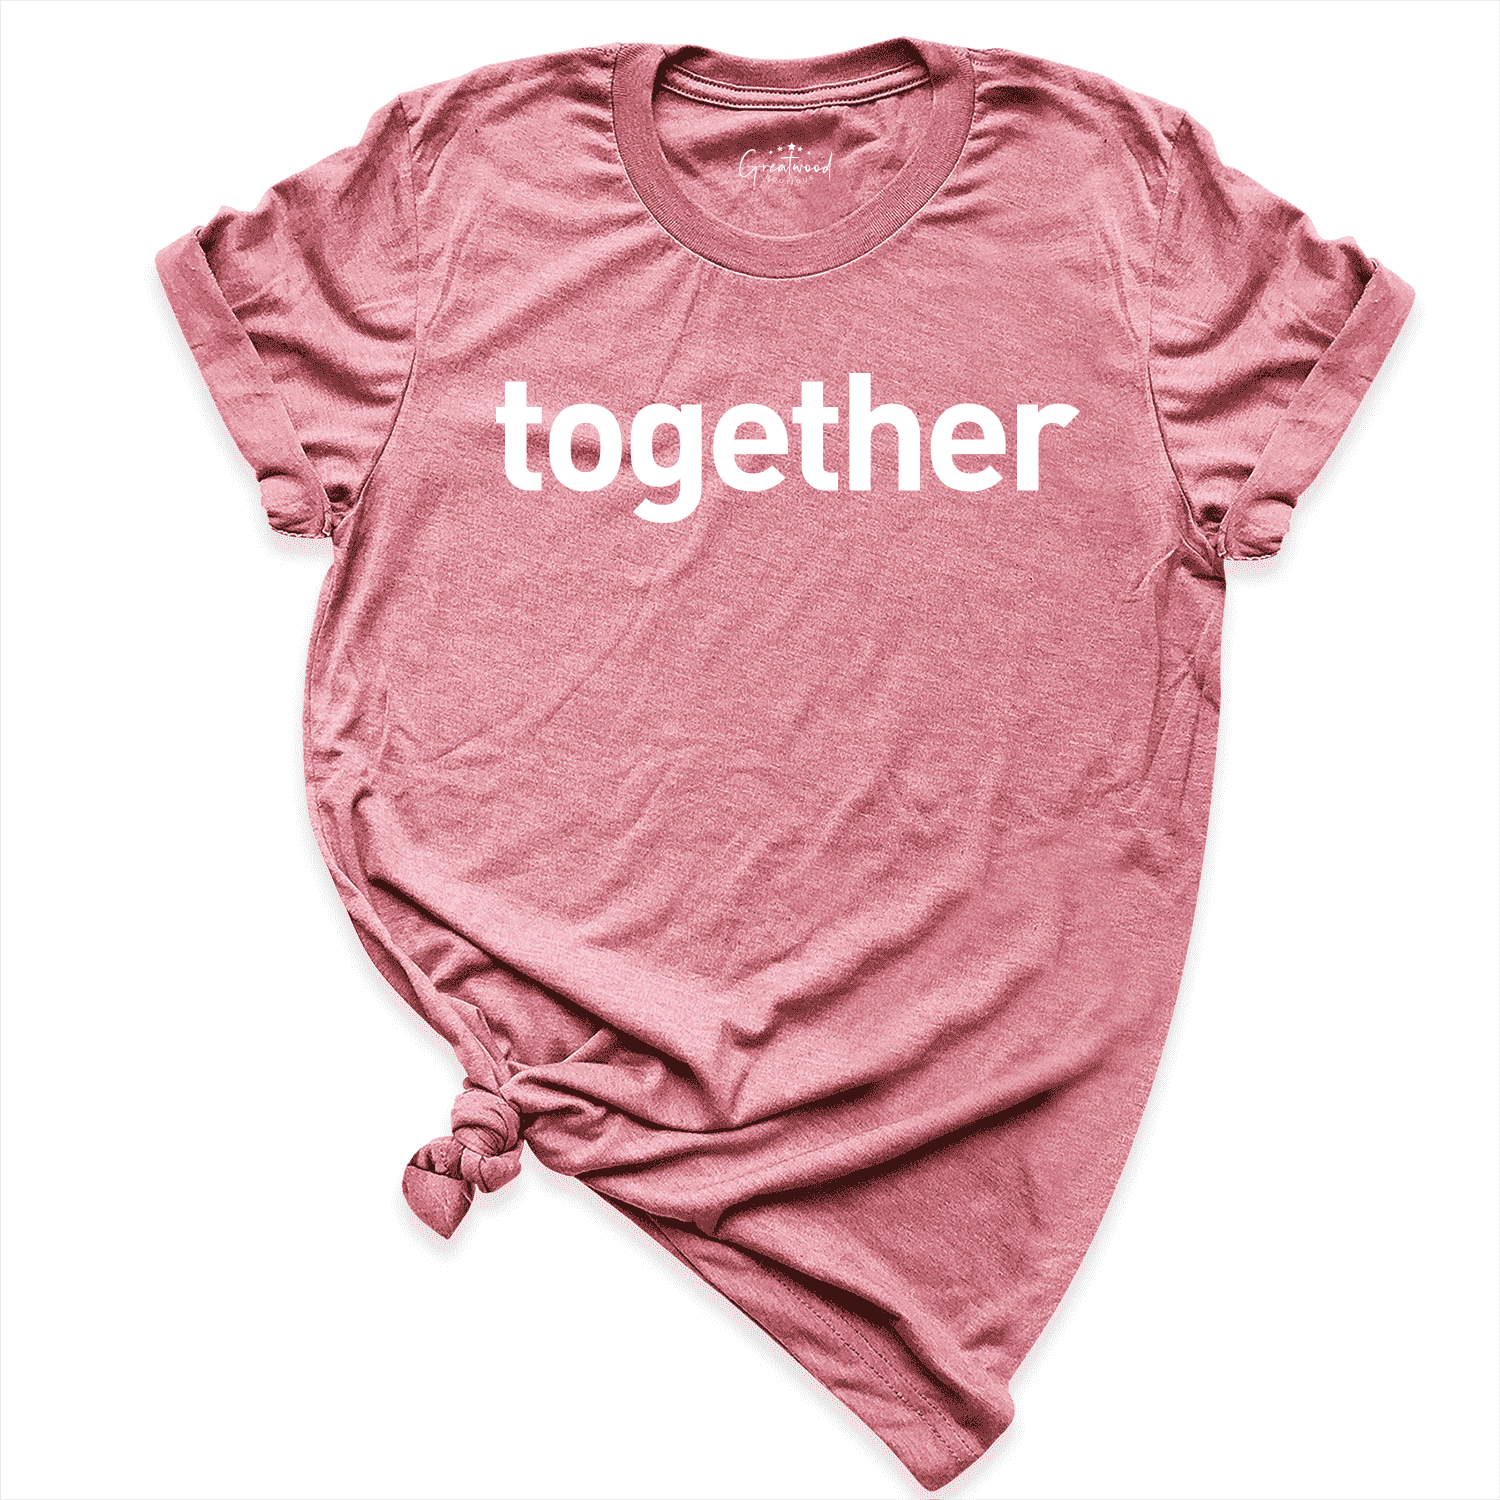 Together Shirt Mauve - Greatwood Boutique